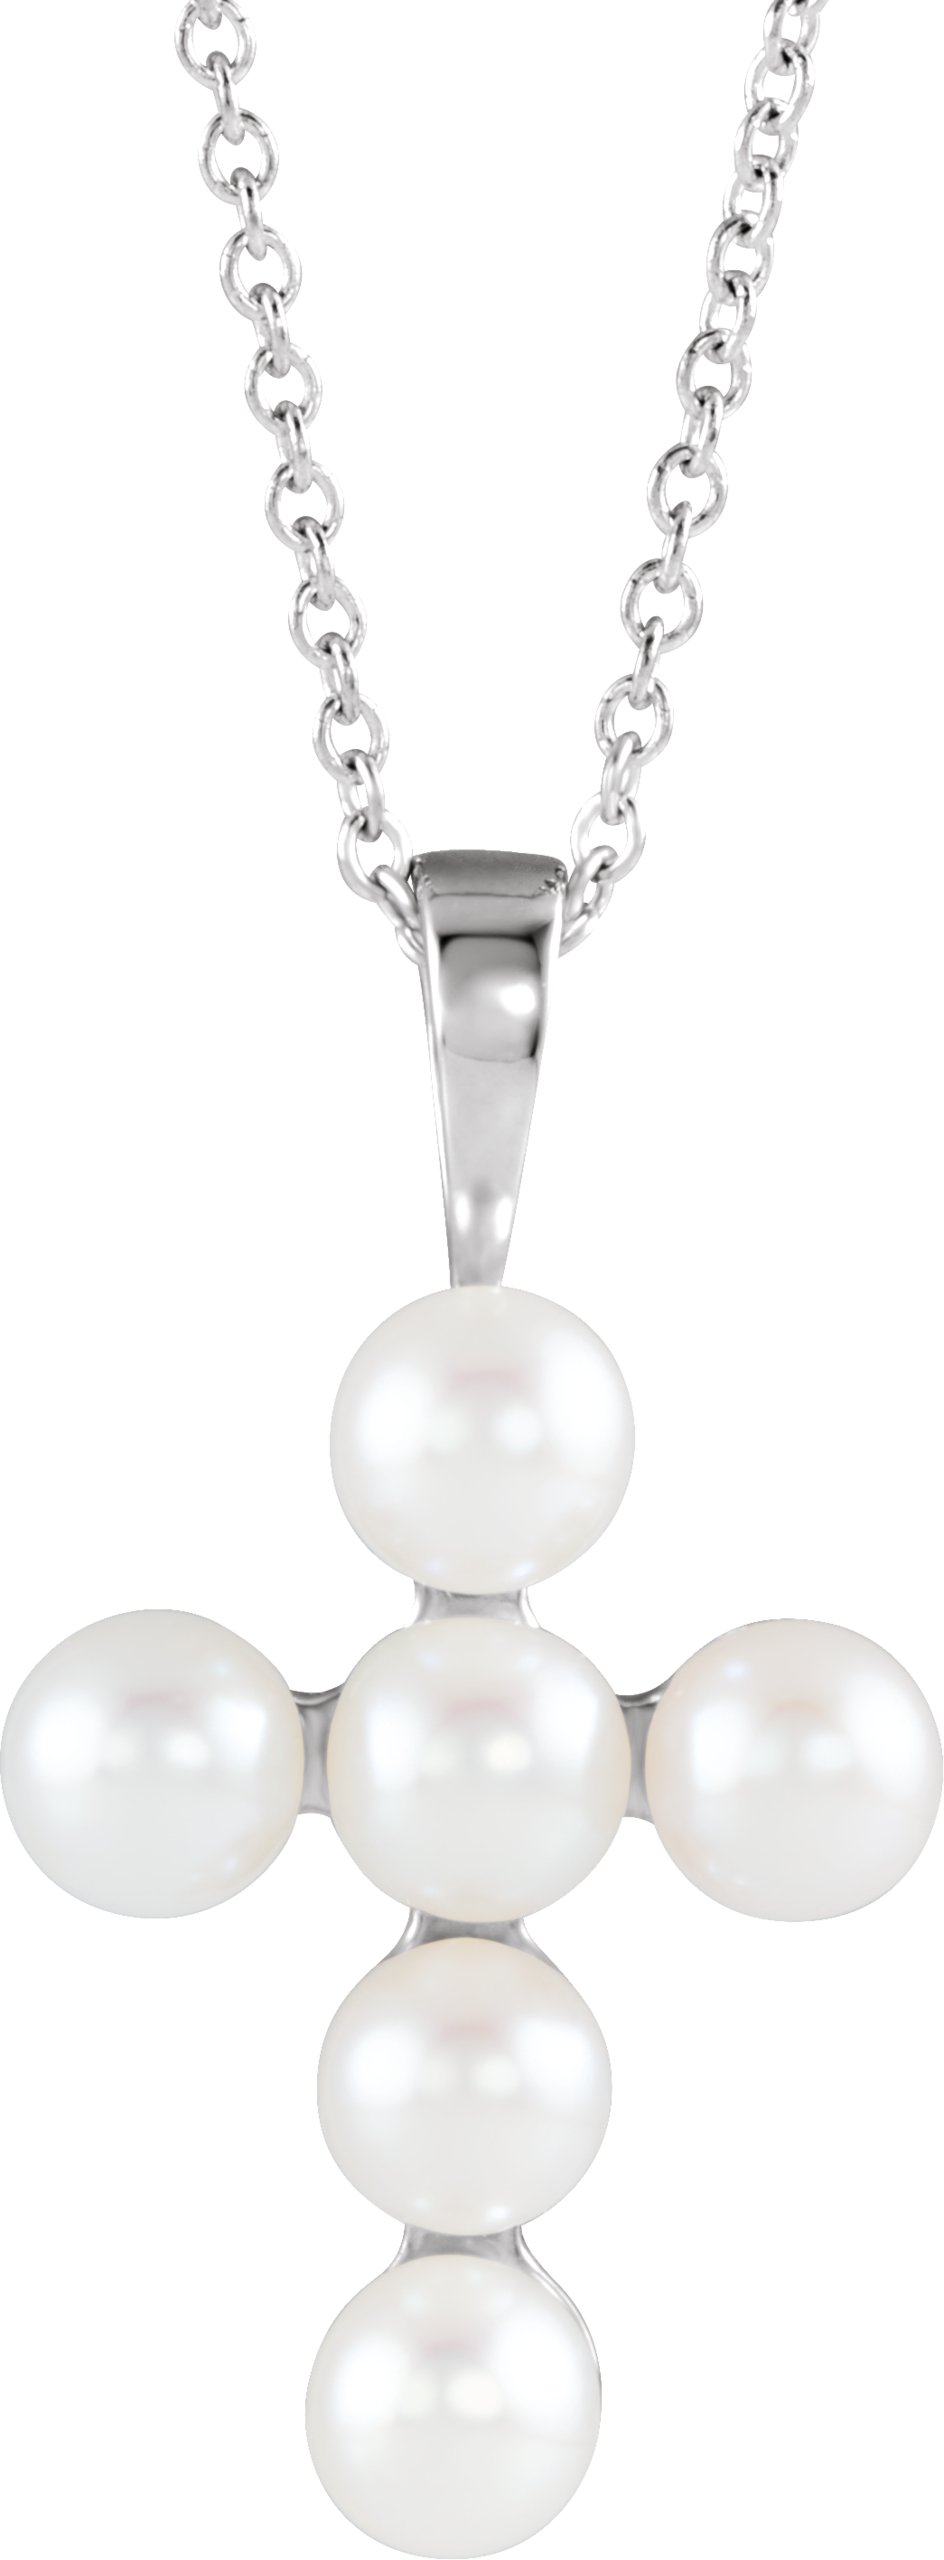 Pearl Cross Necklace or Pendant